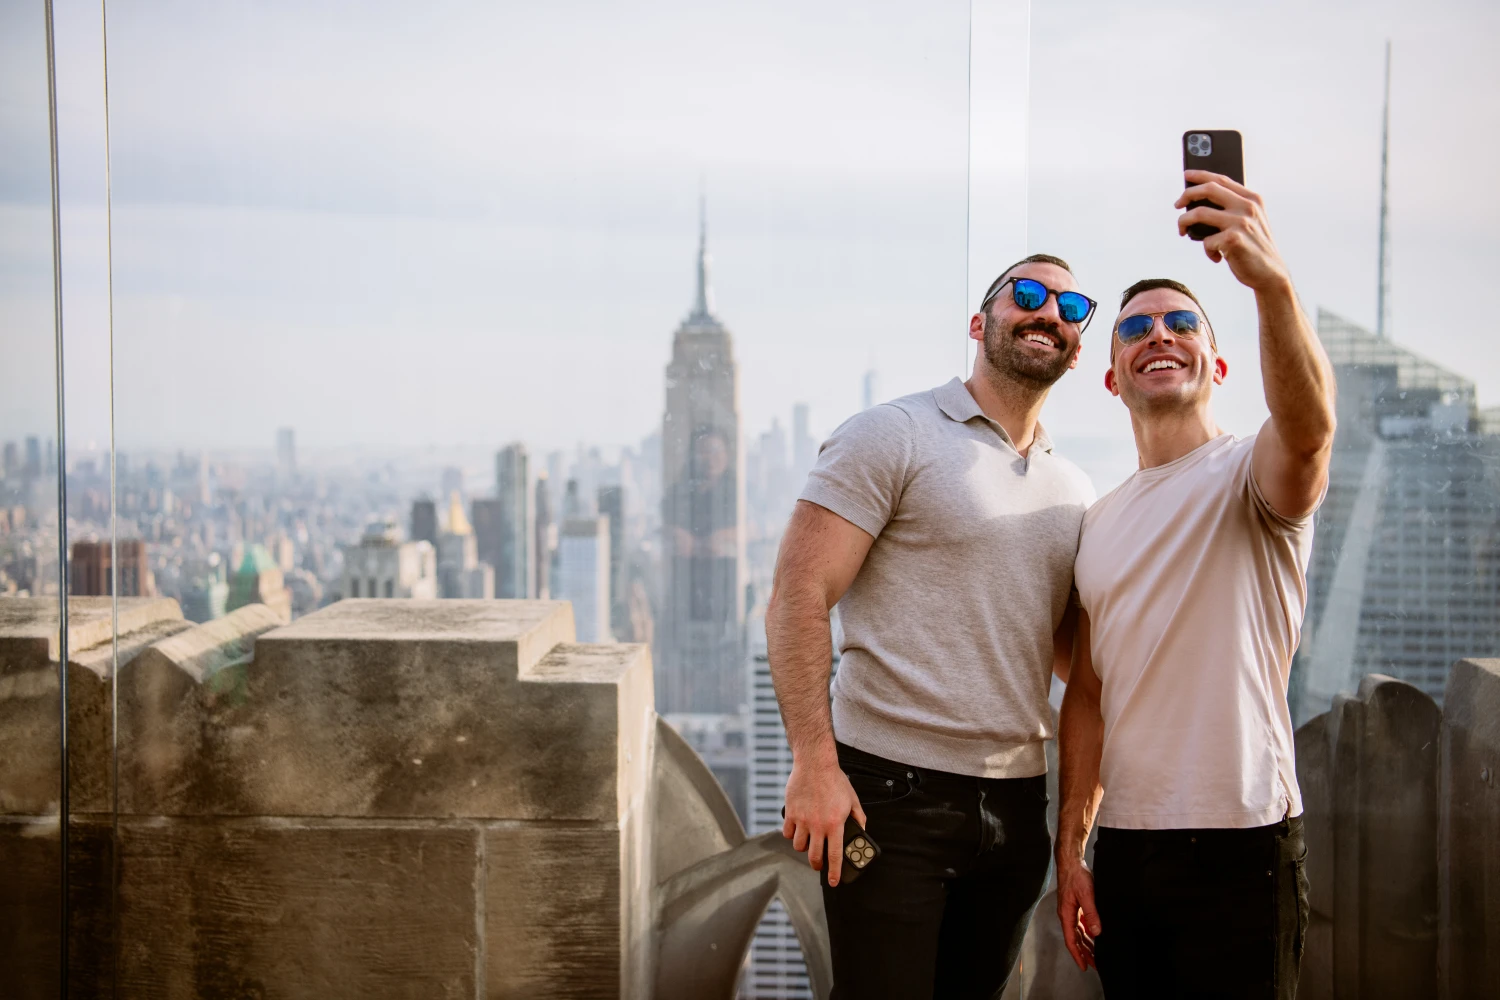 Top of the Rock Observation Deck: What to expect - 7